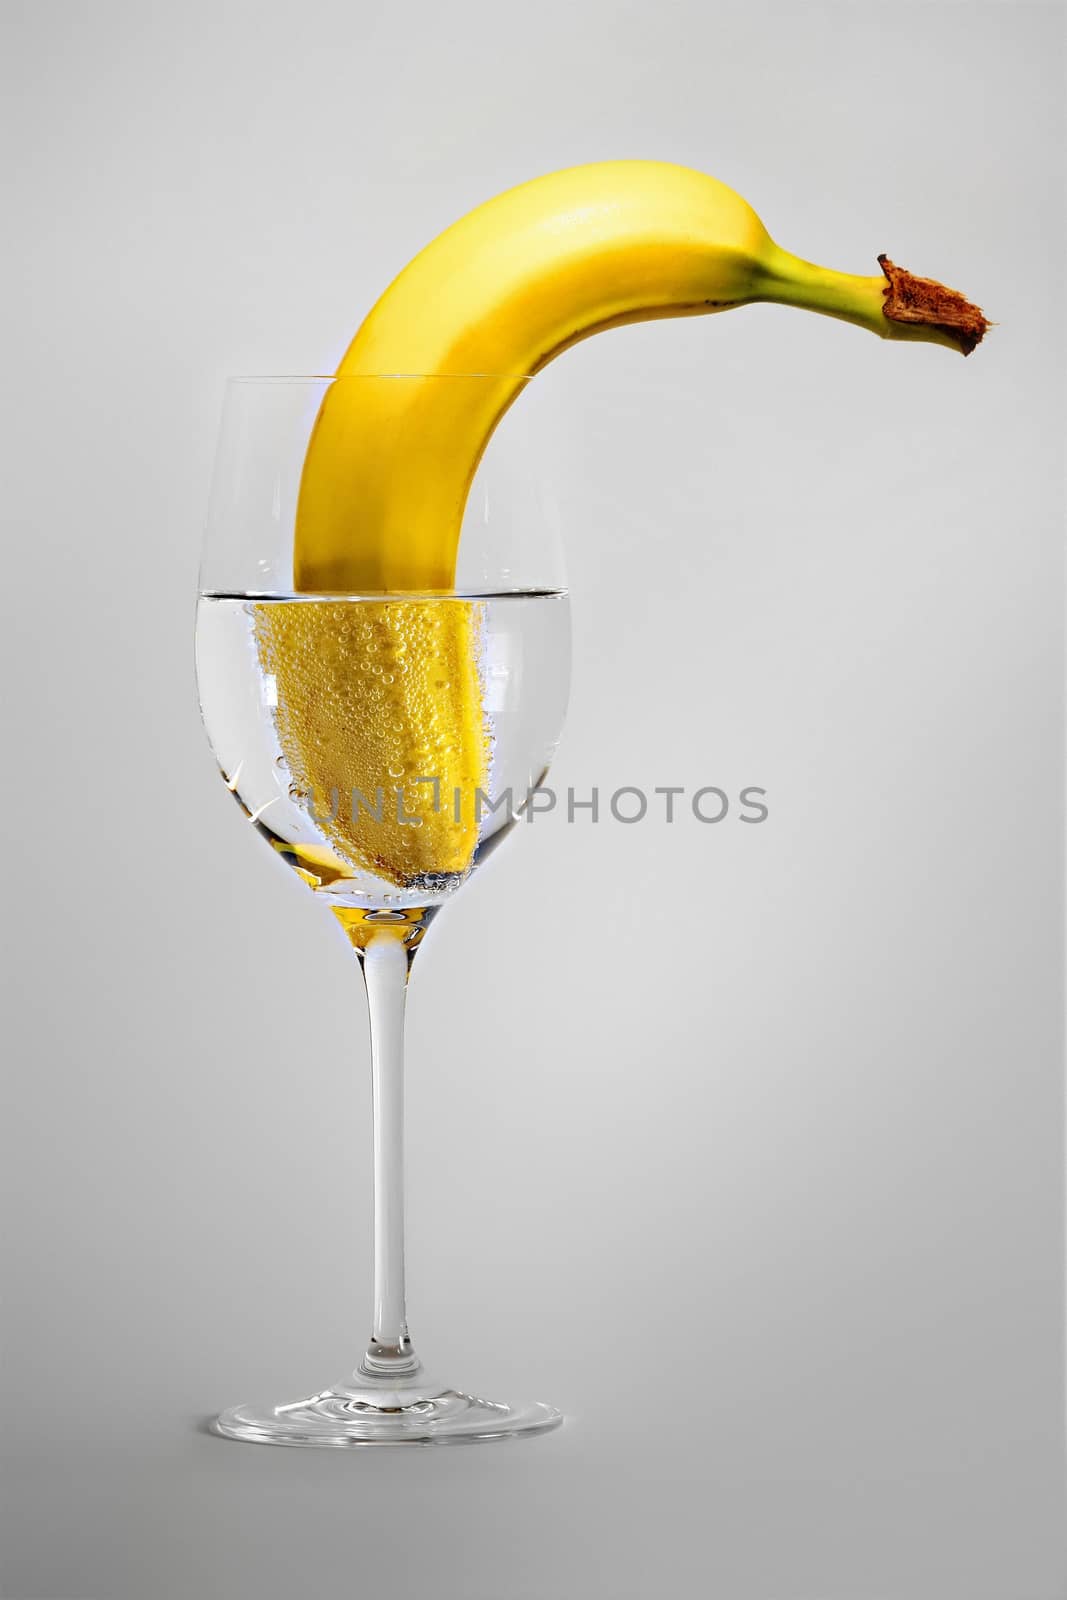 An image of a banana in a wineglass with water